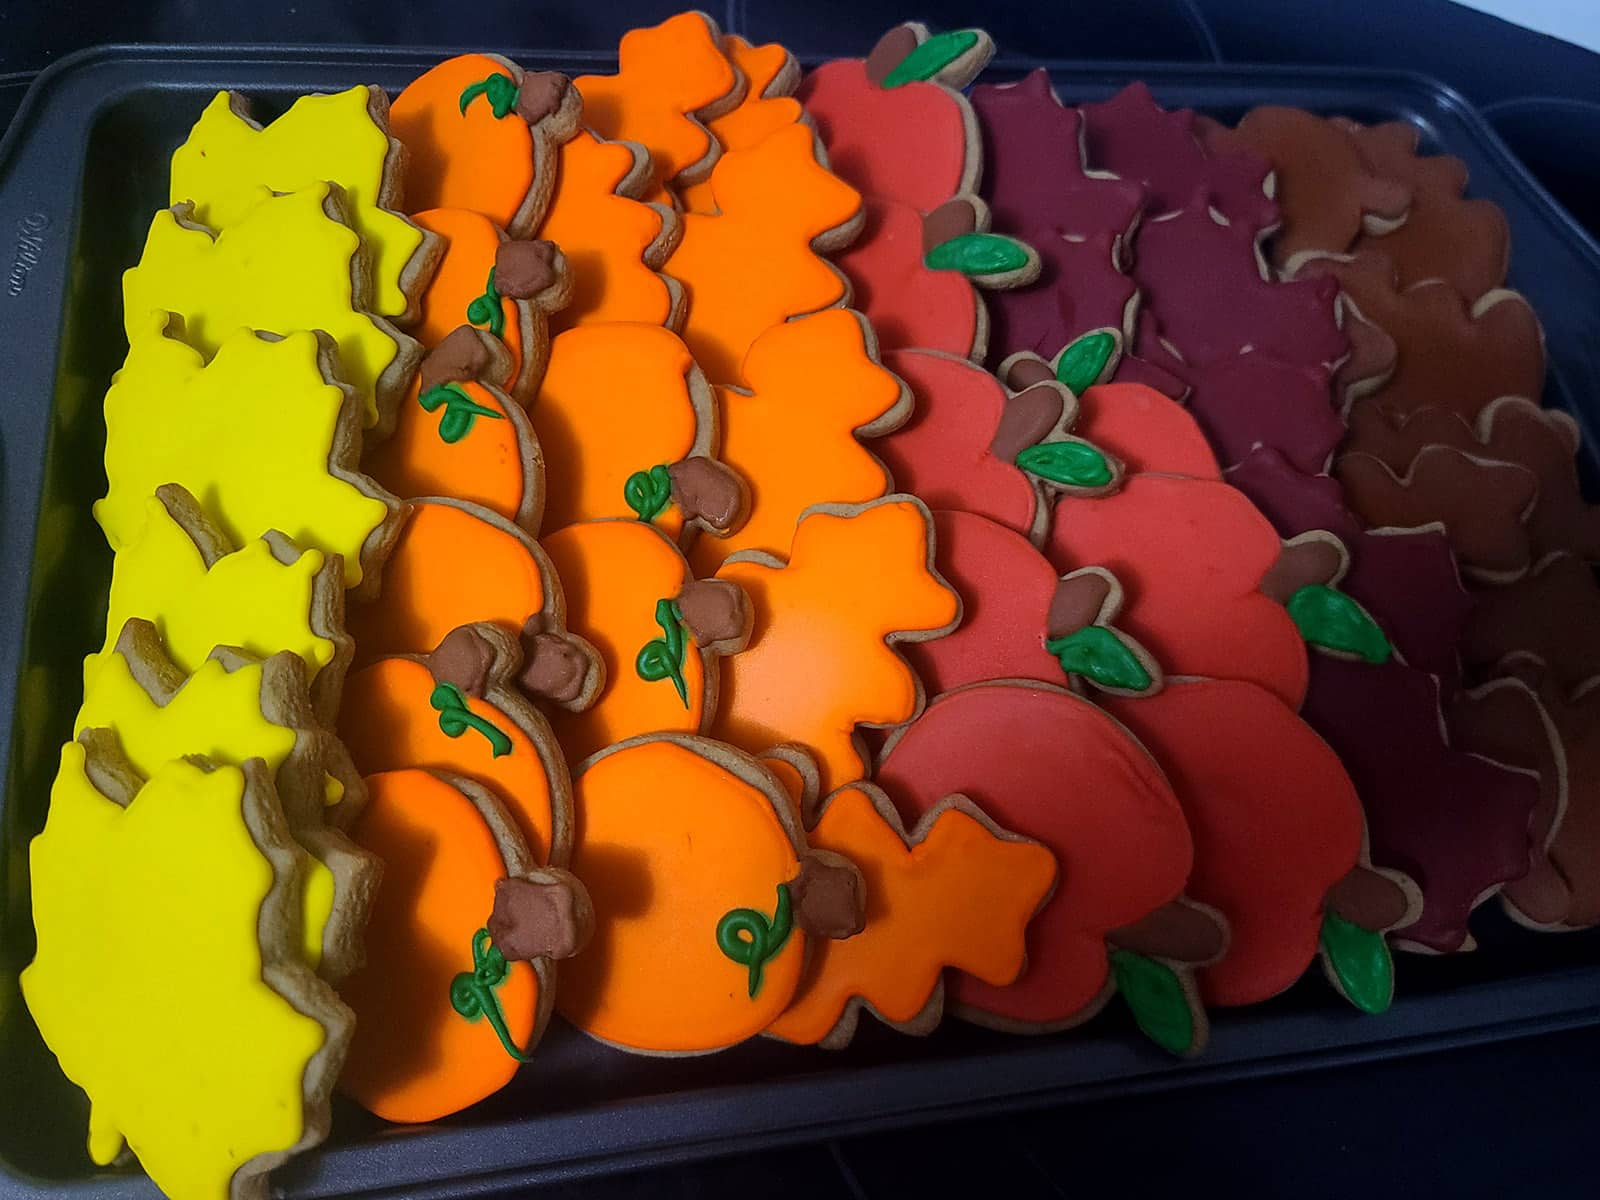 A tray of pumpkin spice sugar cookies decorated in brightly colored royal icing to look like apples, pumpkins, and fall leaves.